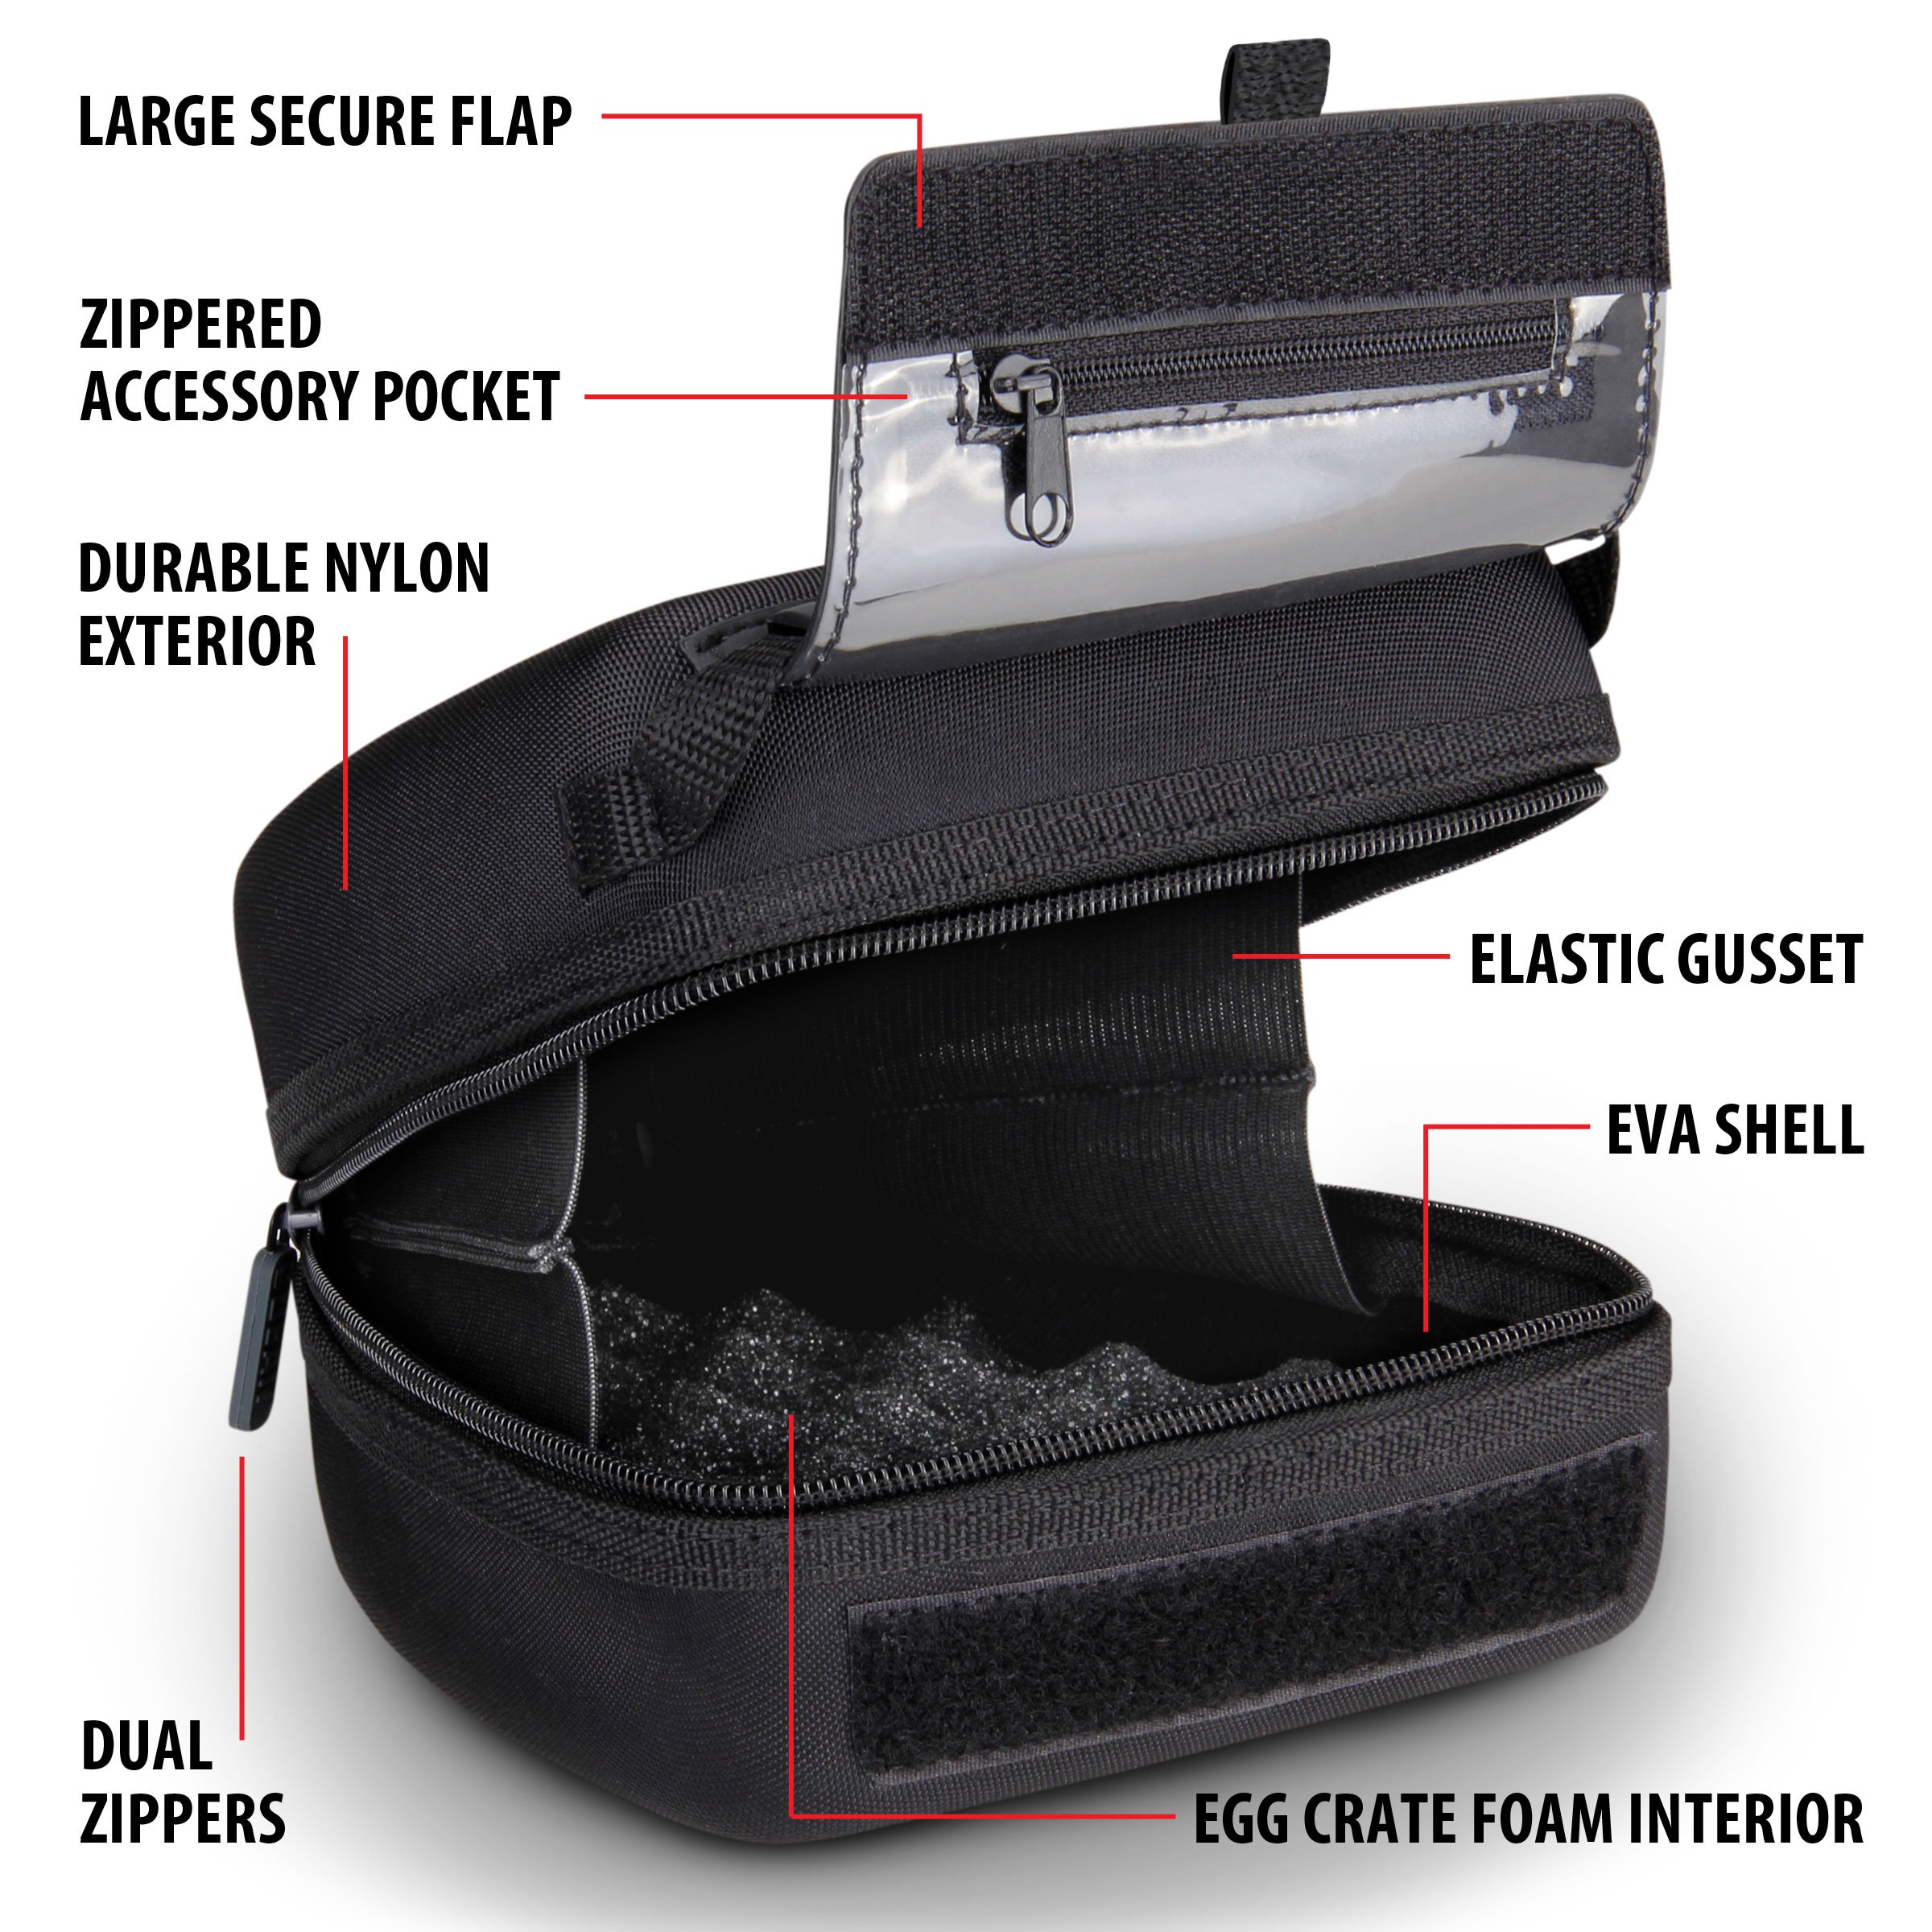 USA Gear Hard Shell DSLR Camera Case (Black) with Molded EVA Protection, Quick Access Opening, Padded Interior and Rubber Coated Handle-Compatible with Nikon, Canon, Pentax, Olympus and More